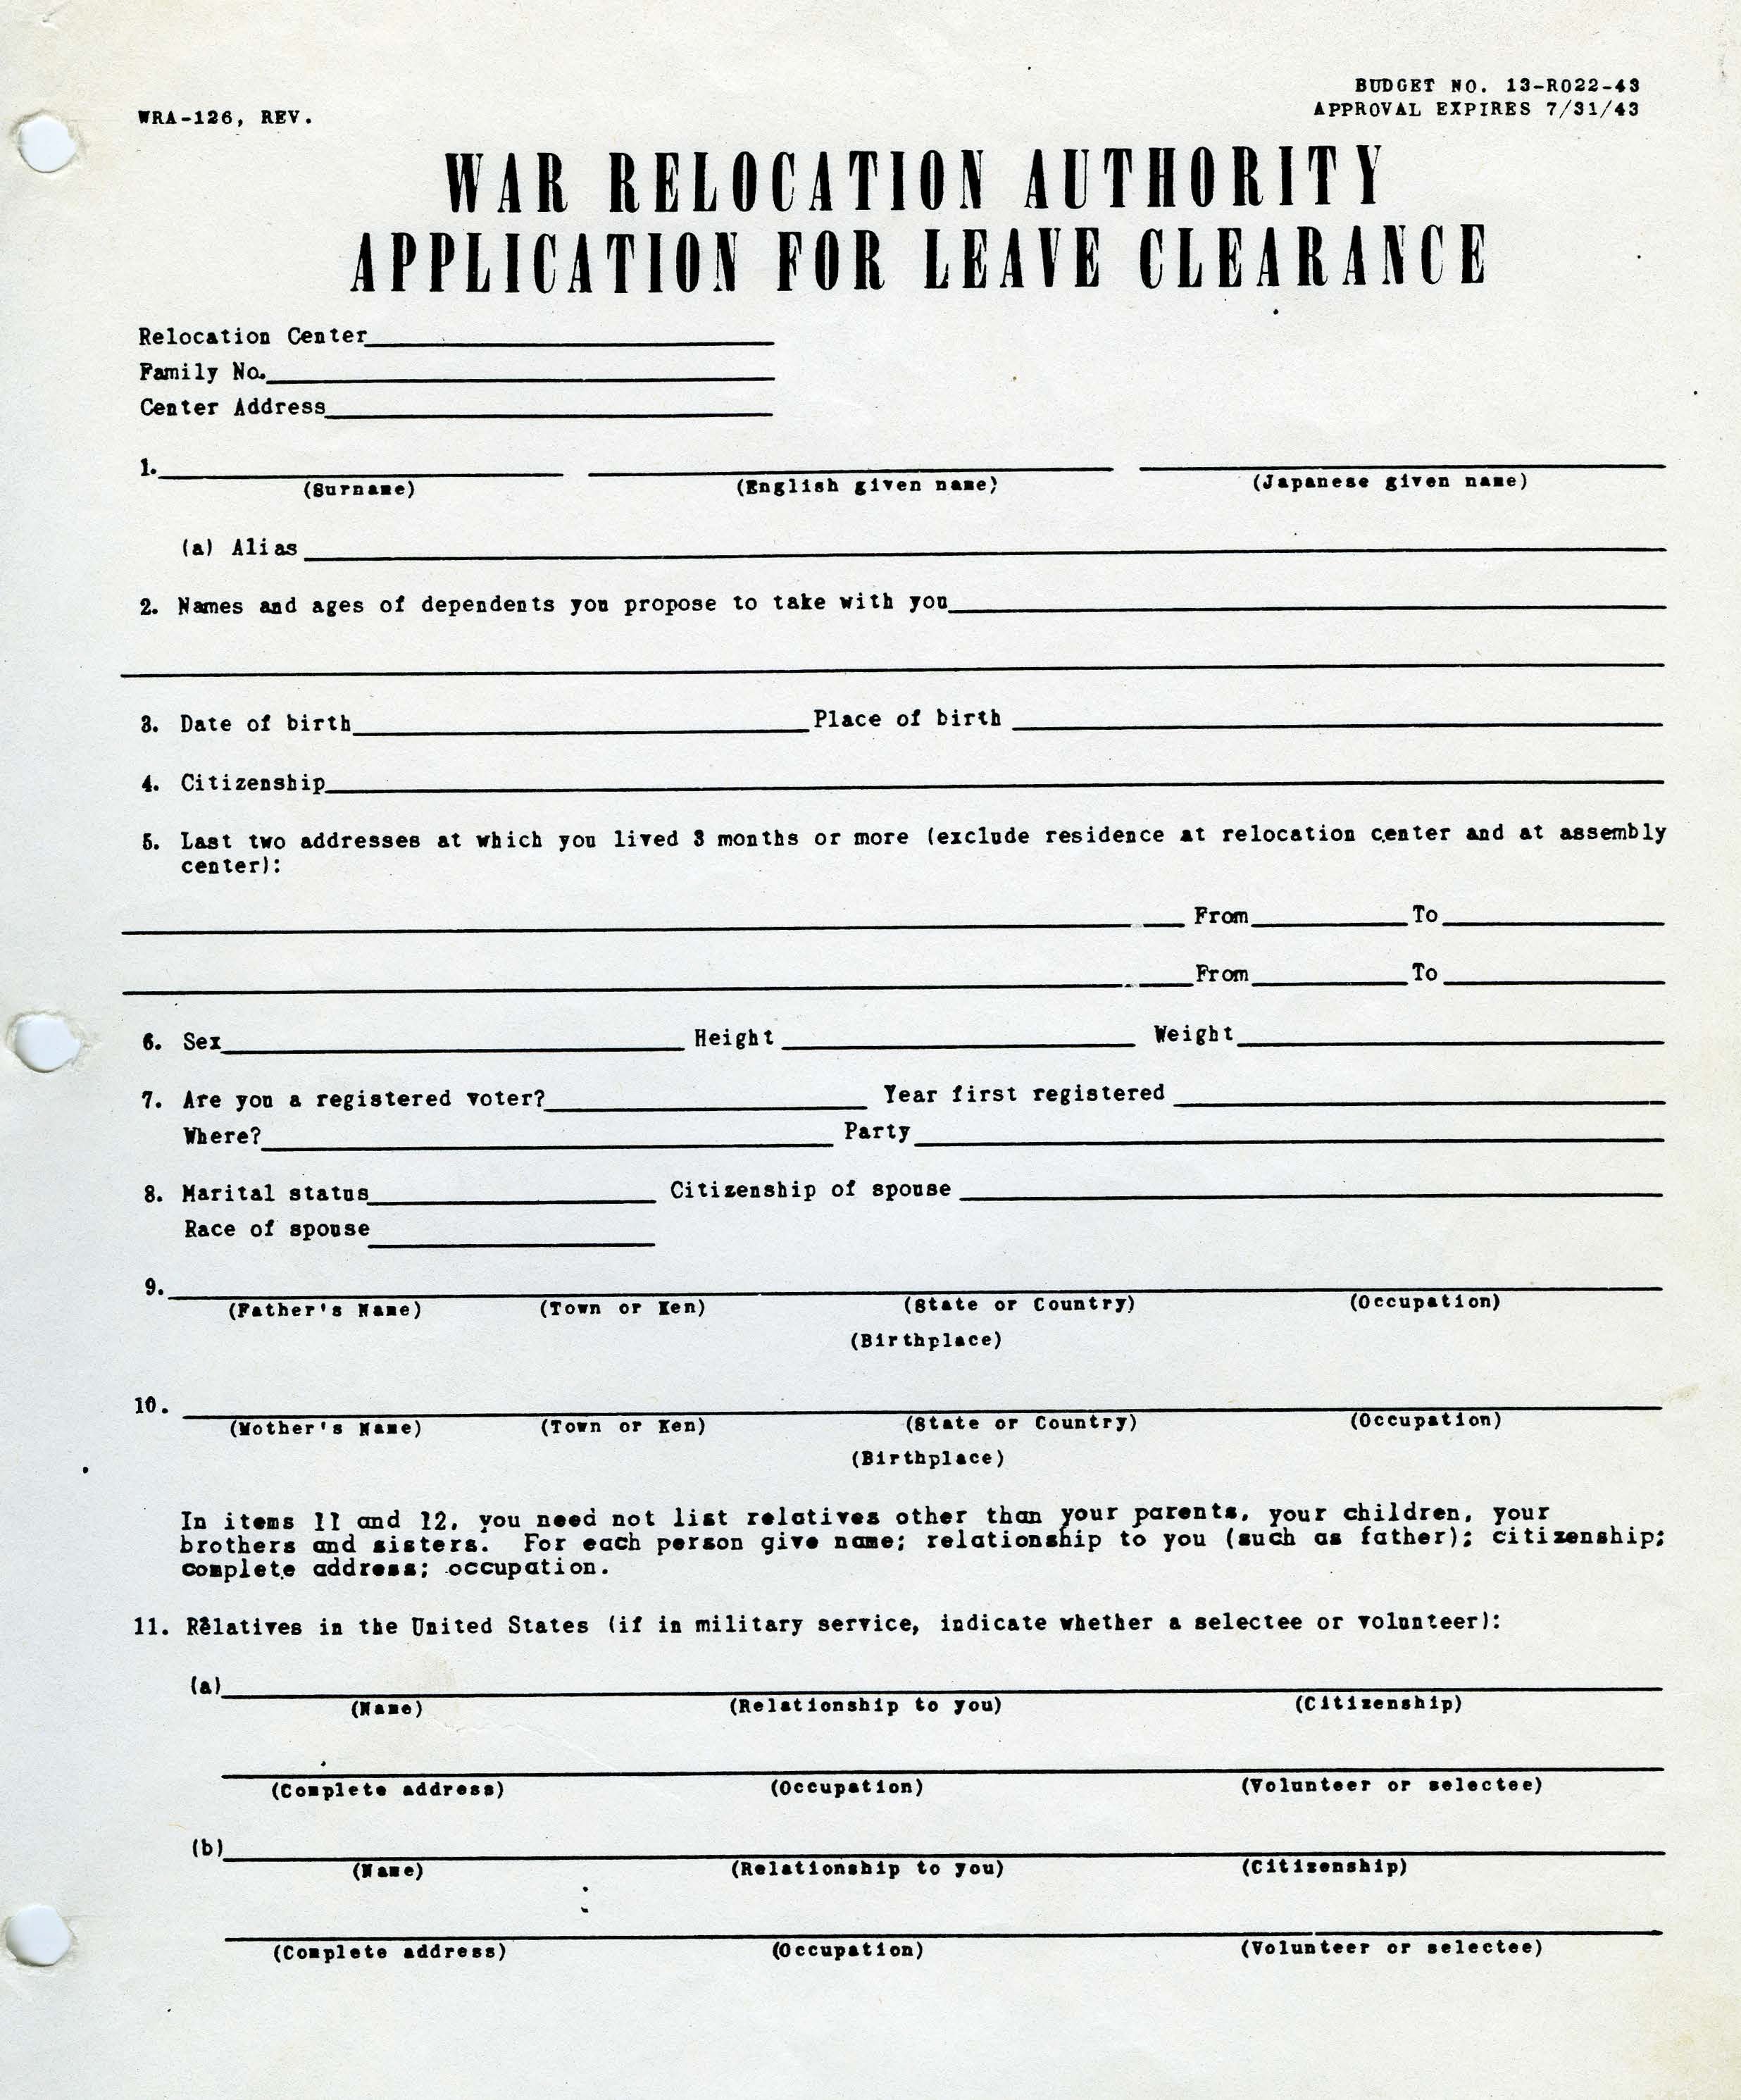 Leave Clearance Form (Loyalty Questionnaire)